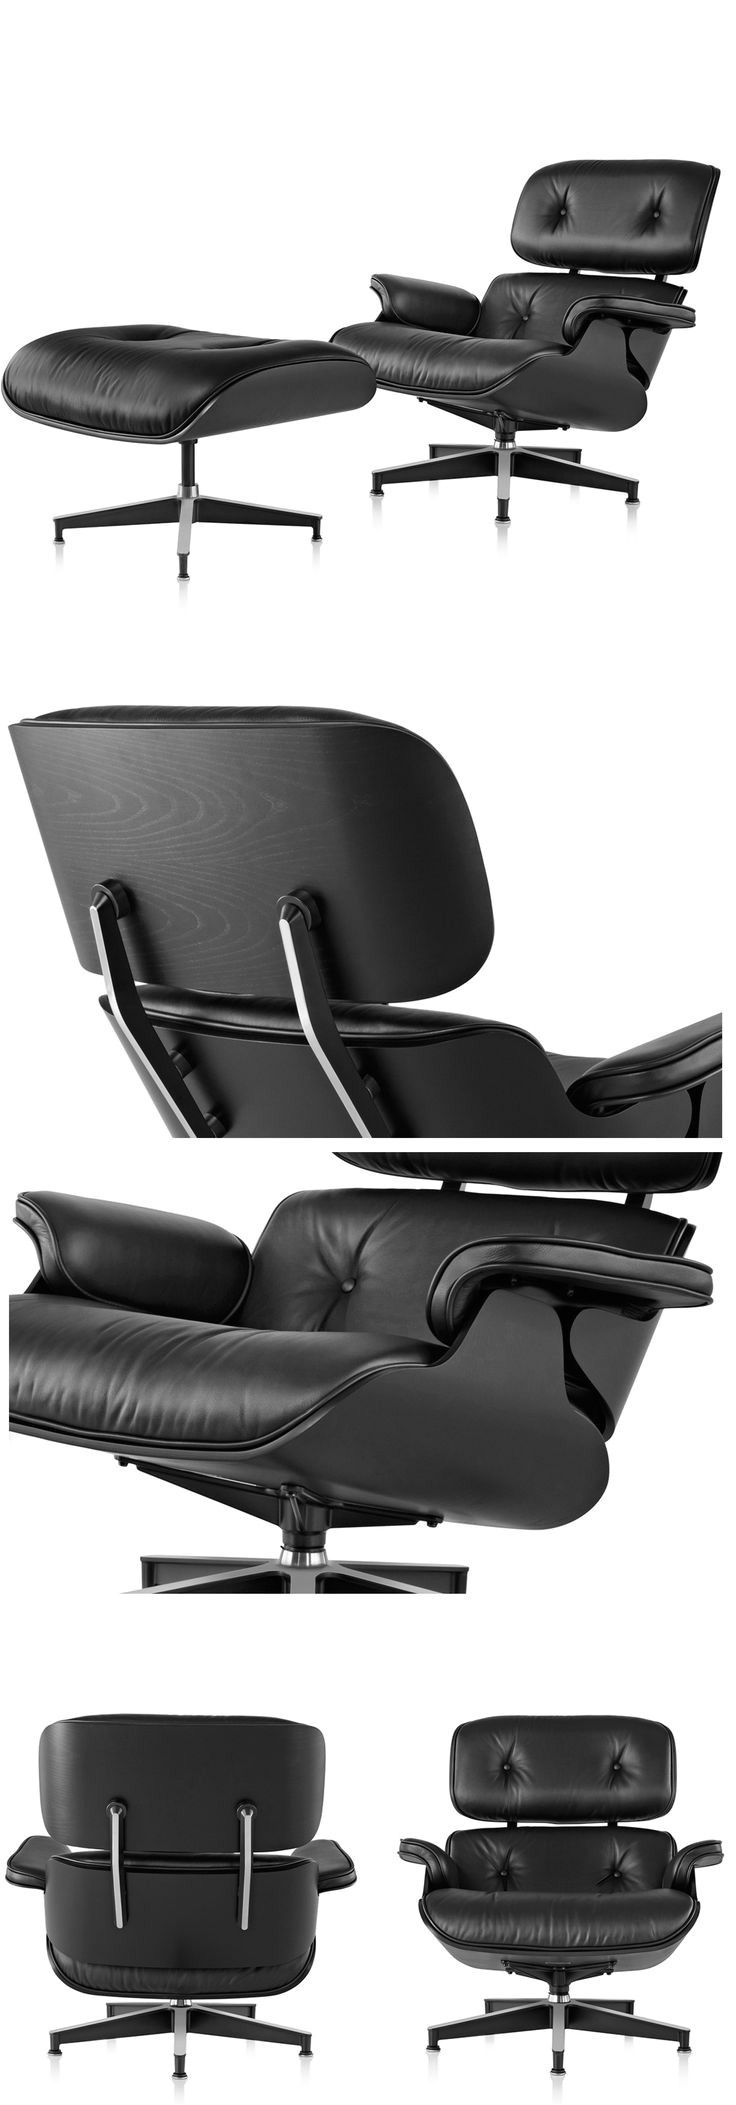 happy new year from the eames office with an ebony eames lounge chair and ottoman by